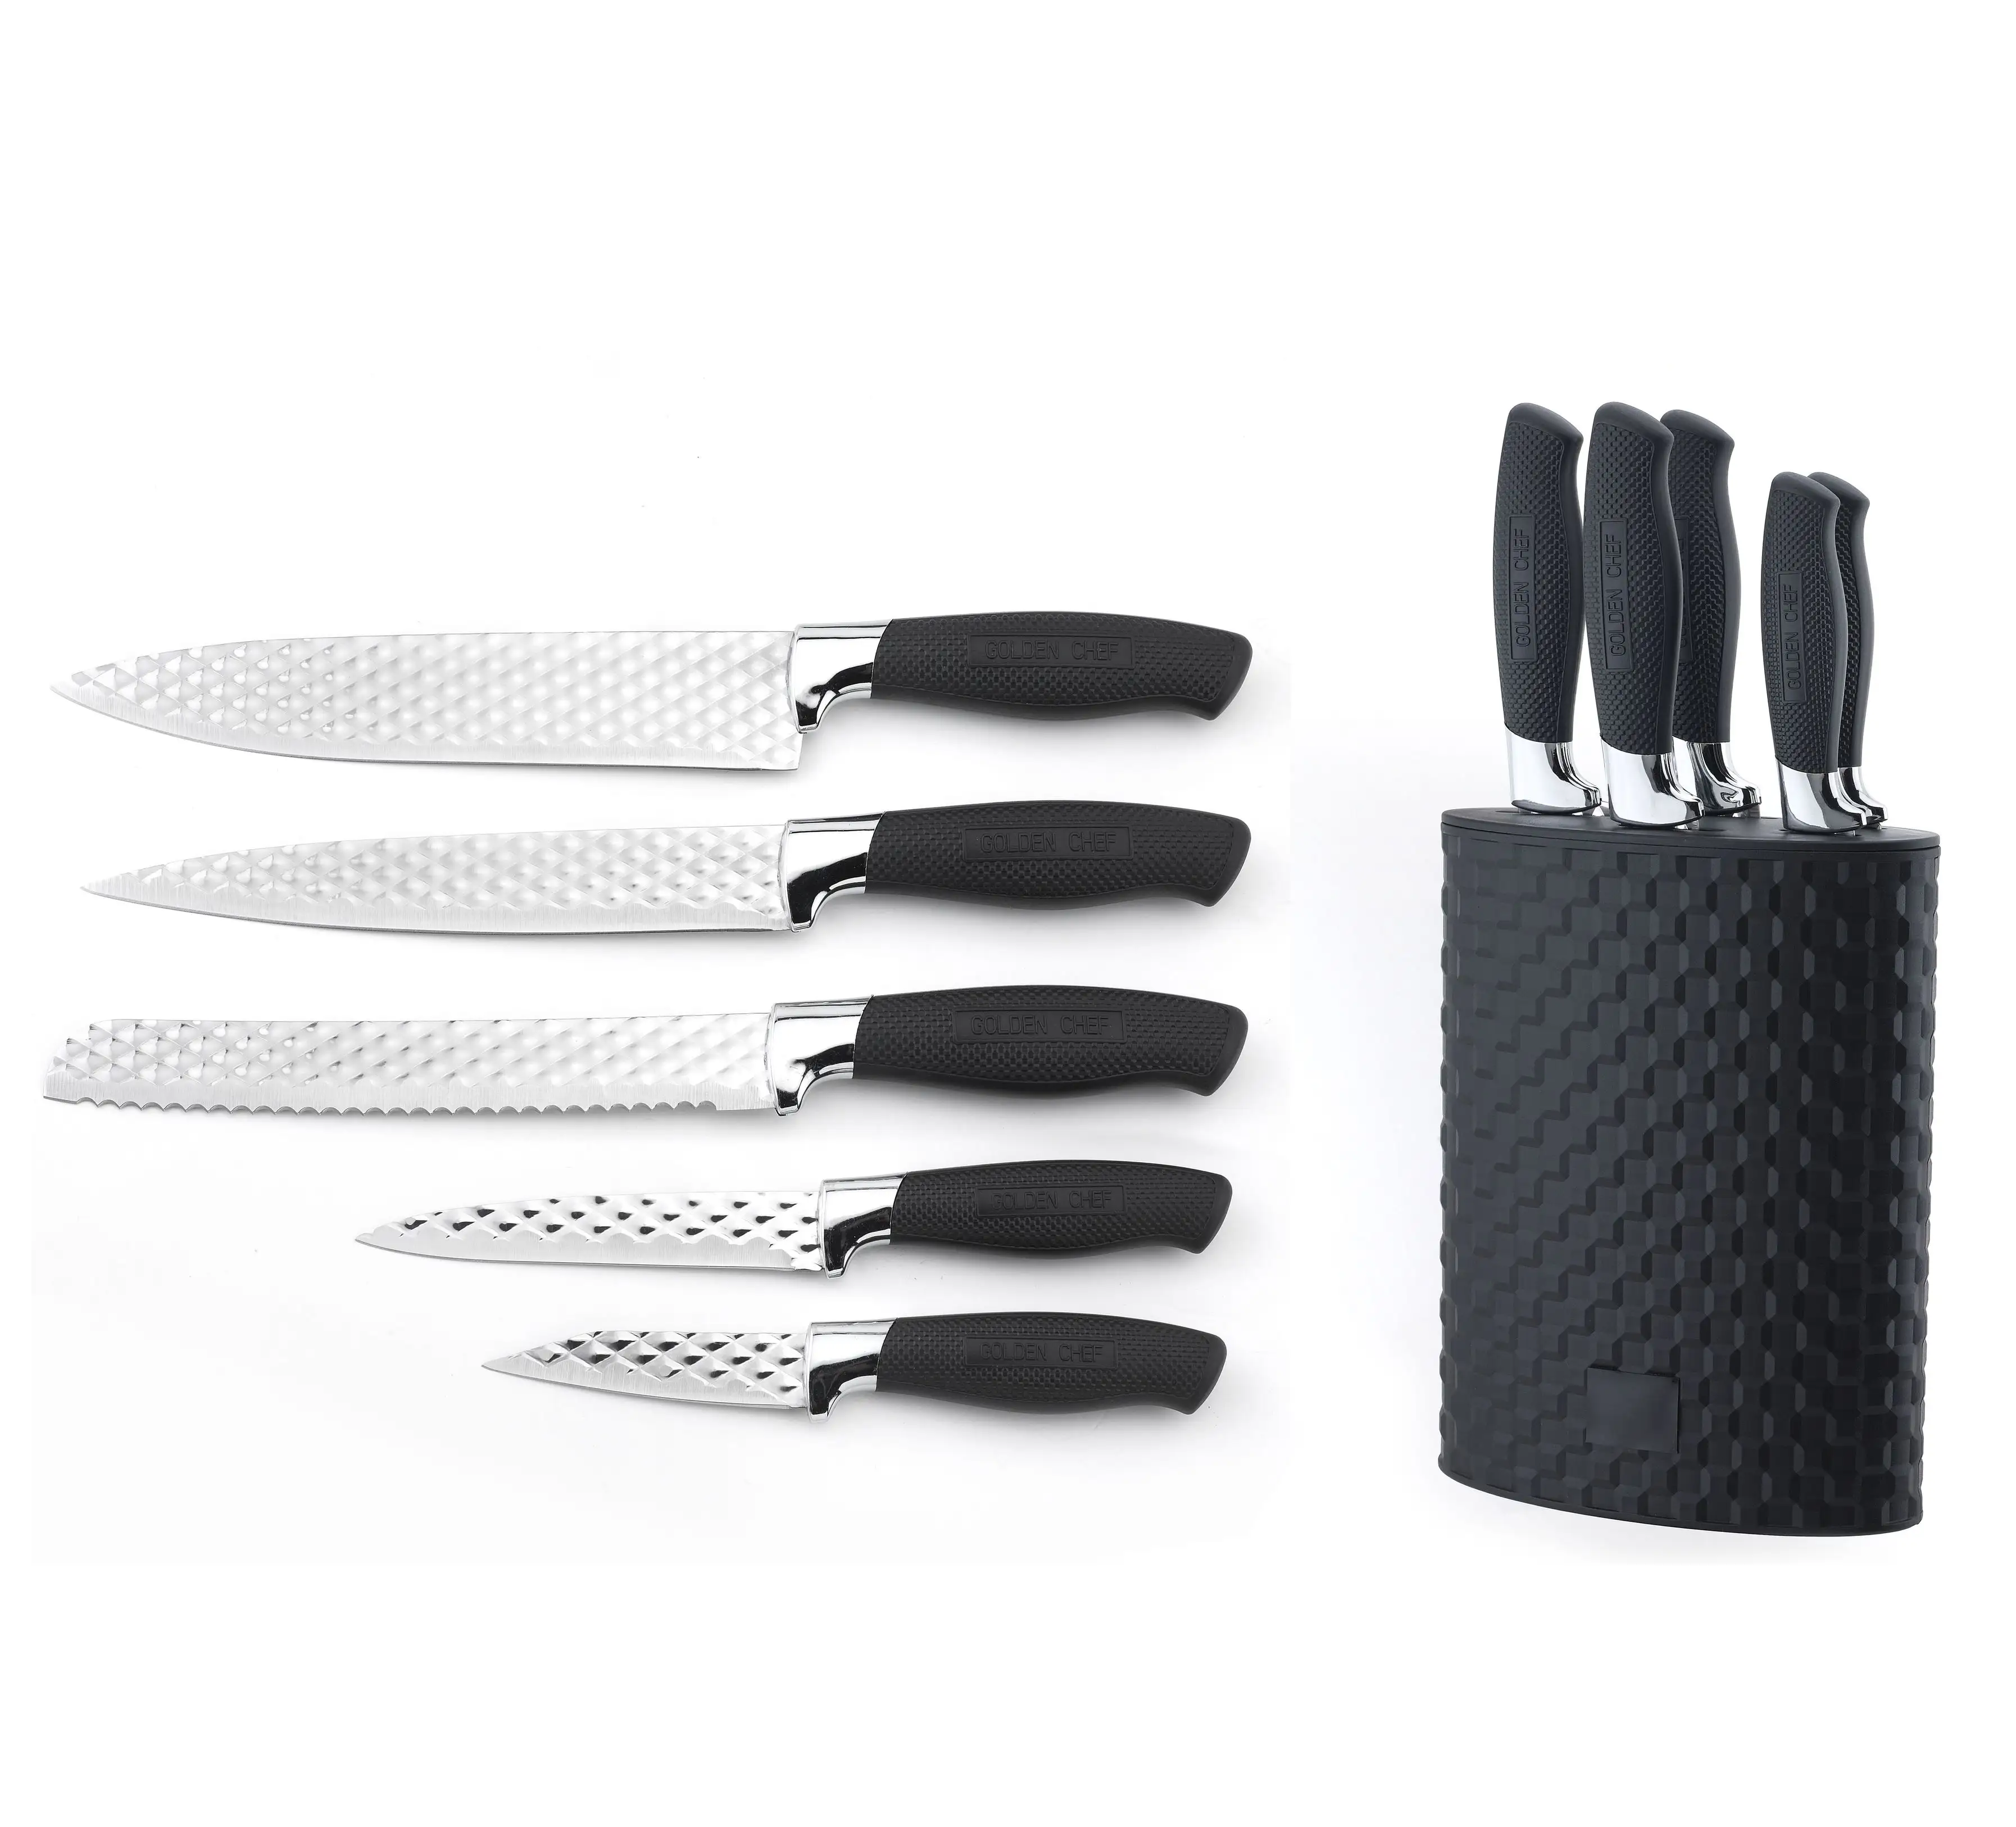 Yanjiang factory Knife Set of 6, diamond embossed stainless steel blade durable quality chef knife with PP storage